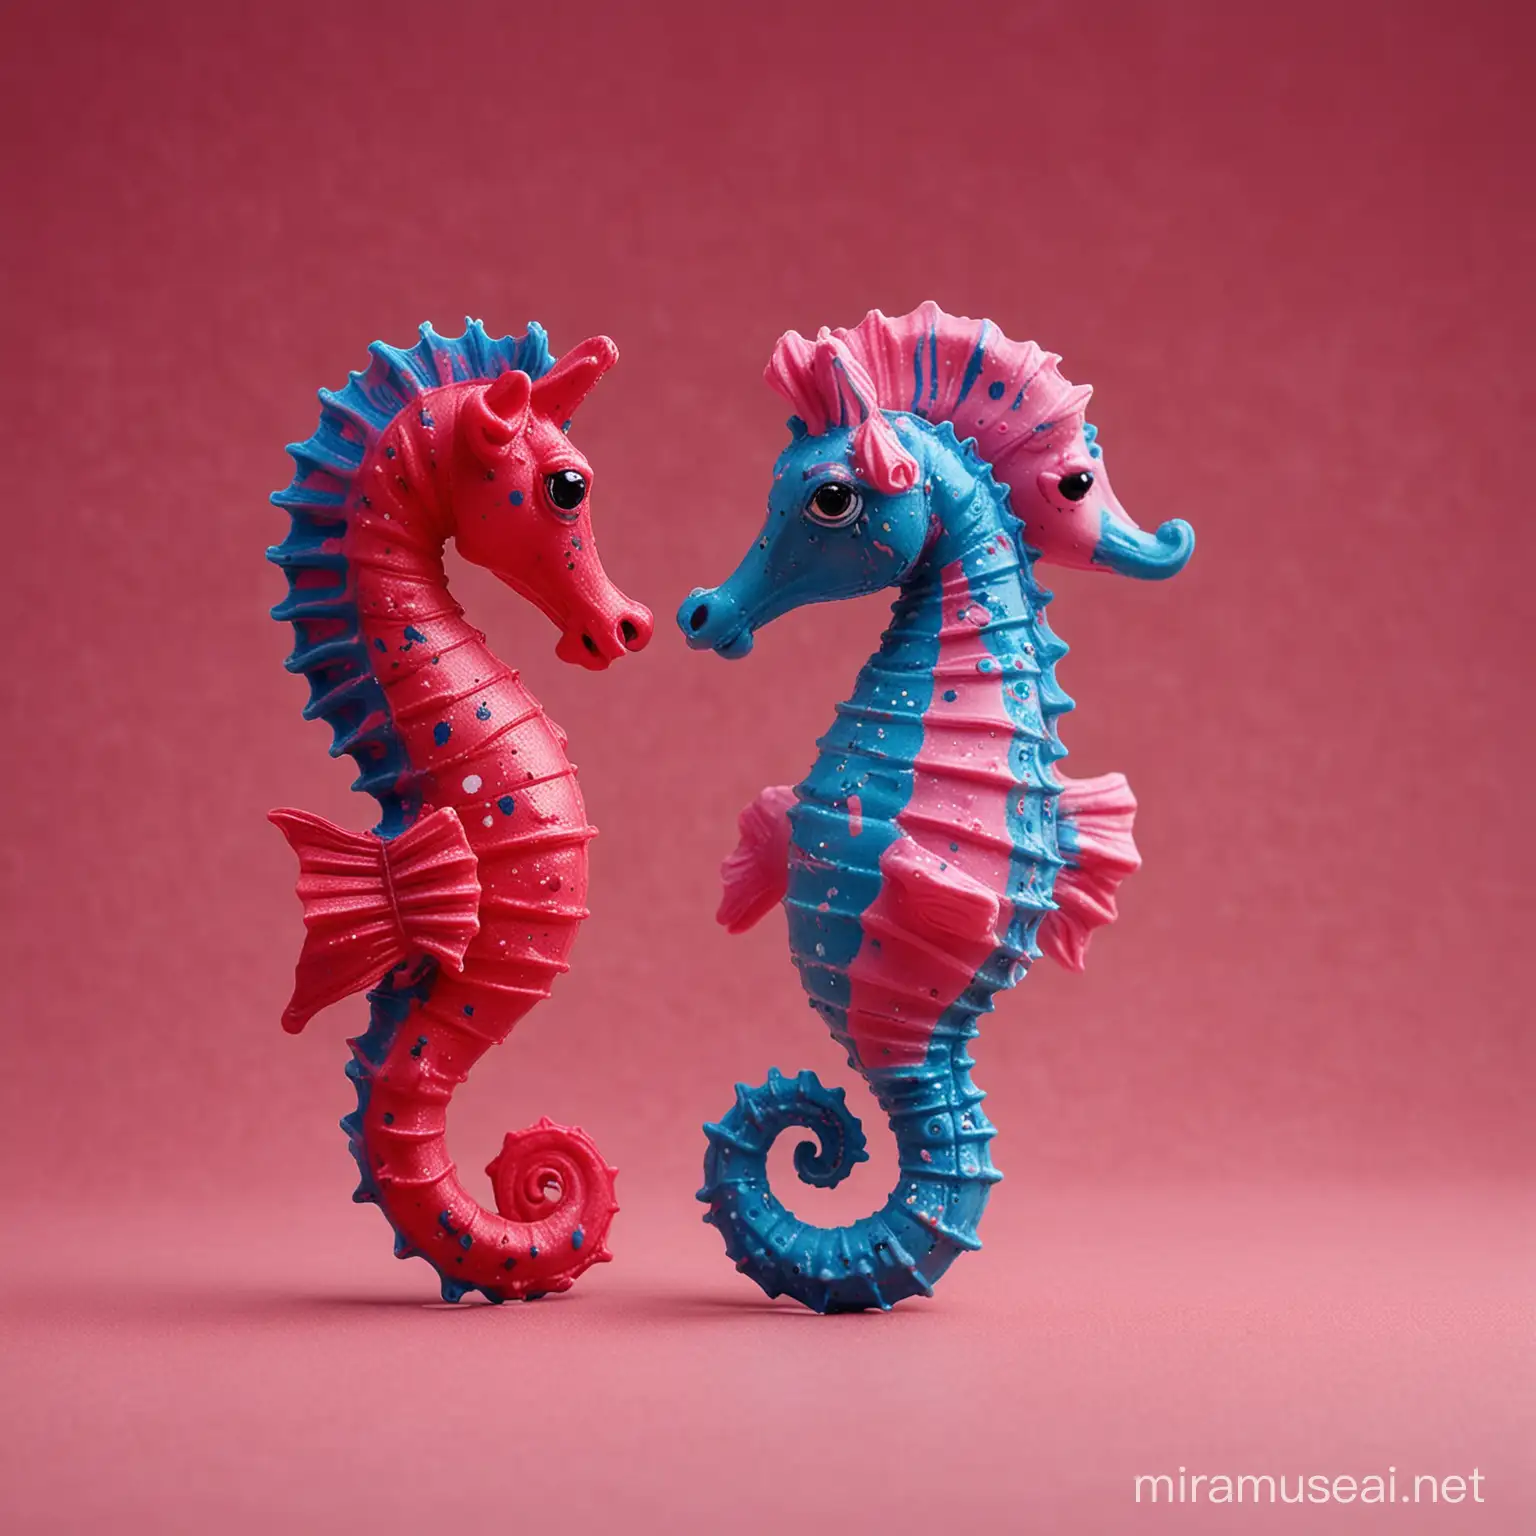 Blue and Pink Toy Seahorses on Red Background in Low Light